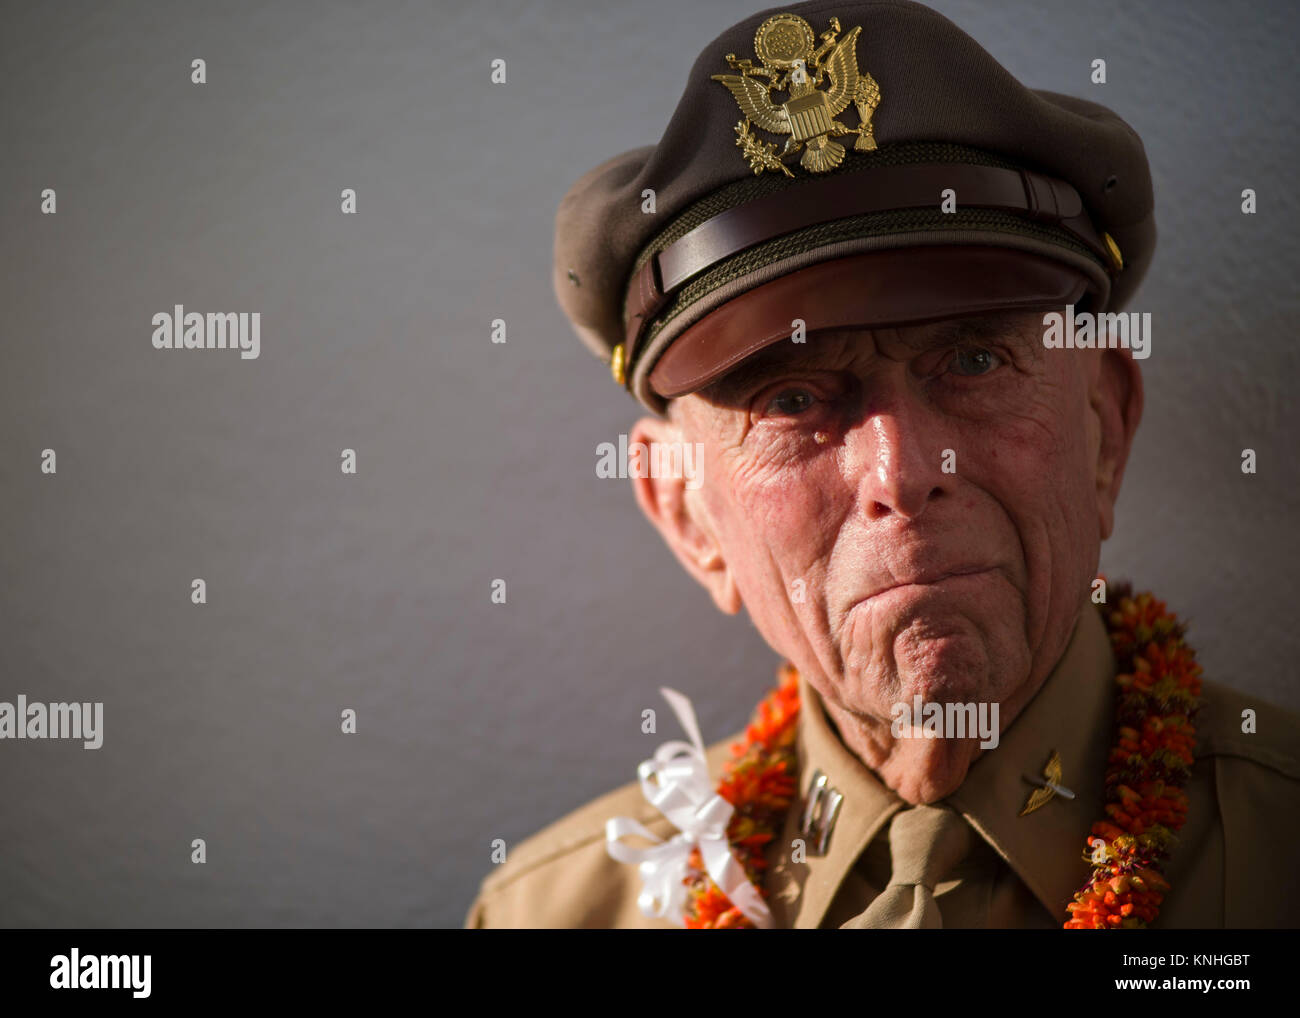 World War II veteran Jerry Yellin attends the Blackened Canteen ceremony at the USS Arizona Memorial during the 75th anniversary commemoration of the attacks on Pearl Harbor December 6, 2016 in Pearl Harbor, Hawaii. The blackened canteen is a relic of a 1945 air raid over Japan and is used for pouring bourbon whiskey as an offering to the fallen in the waters of Pearl Harbor.(photo by PO2 Somers Steelman via Planetpix) Stock Photo